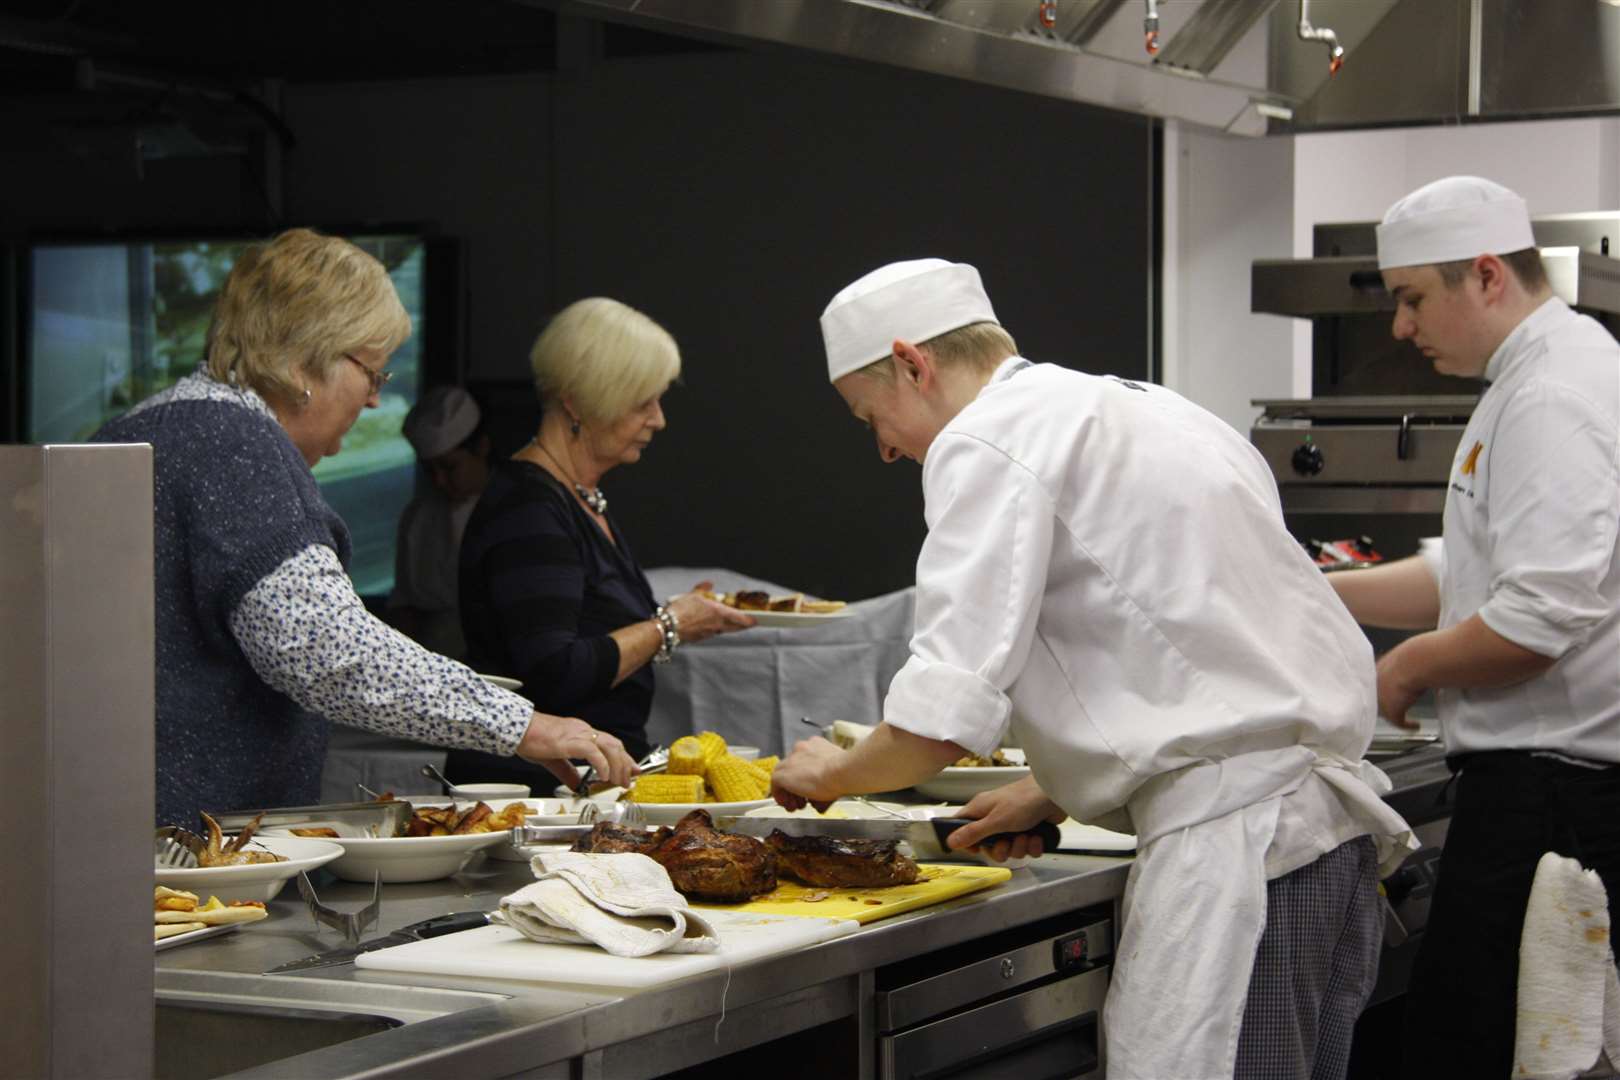 Hospitality apprentices at work